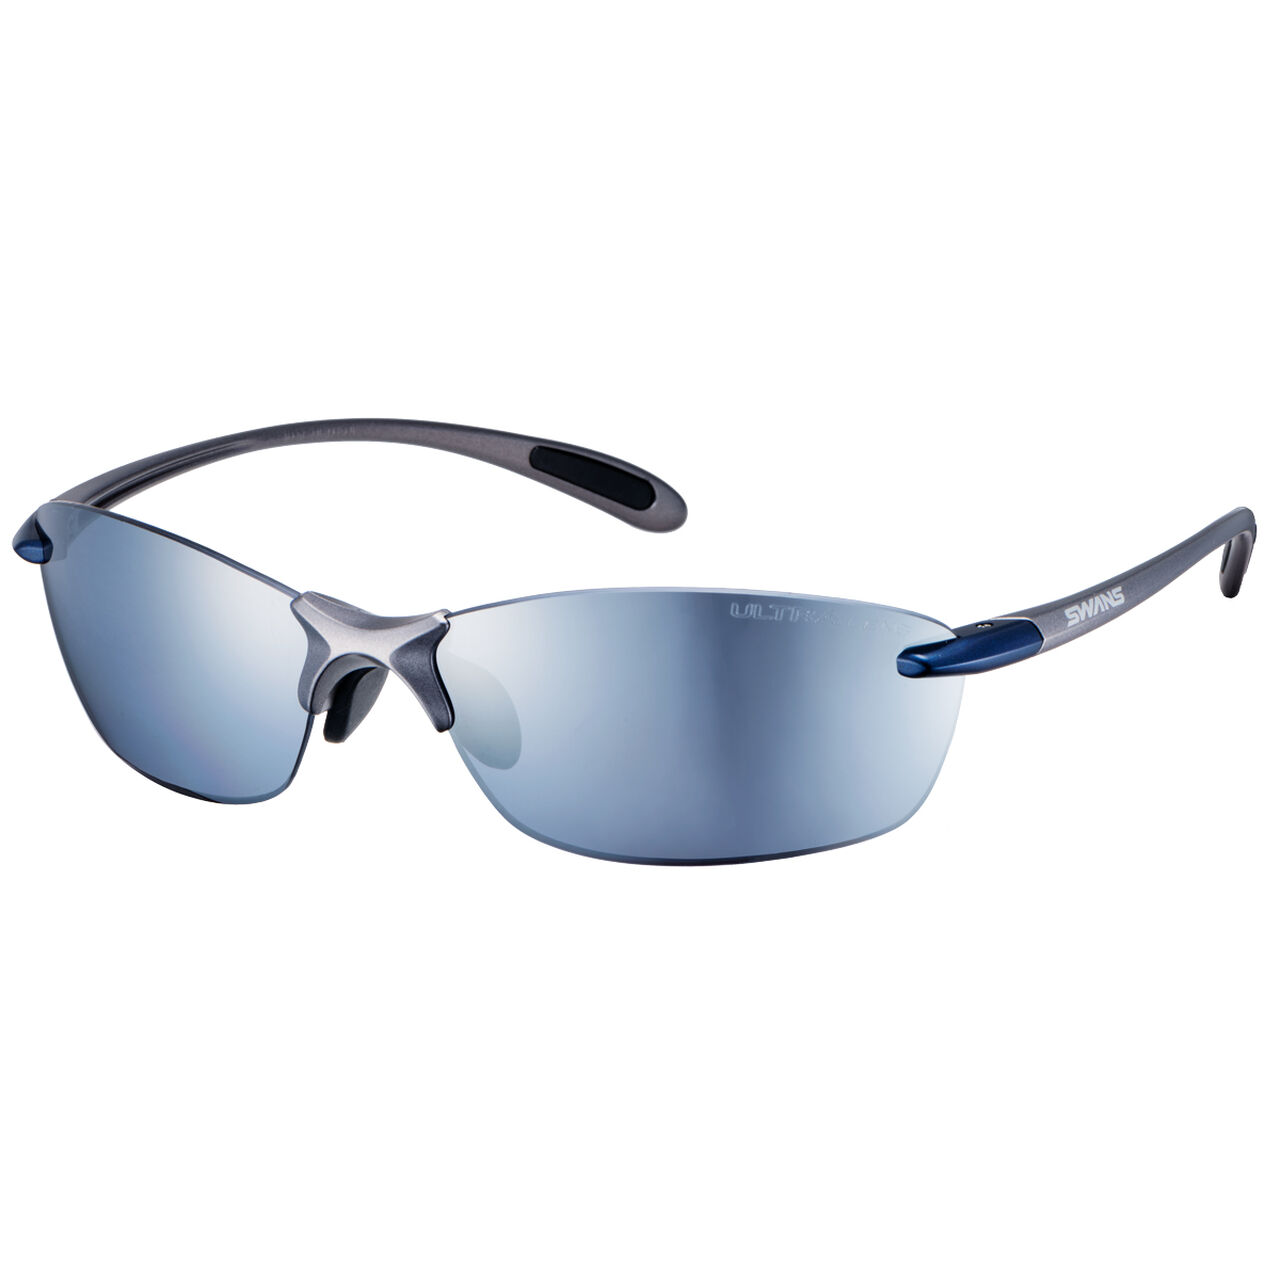 SA-Fit 0767 Silver mirror Polarized ULTRA Iceblue,Opt10, large image number 0